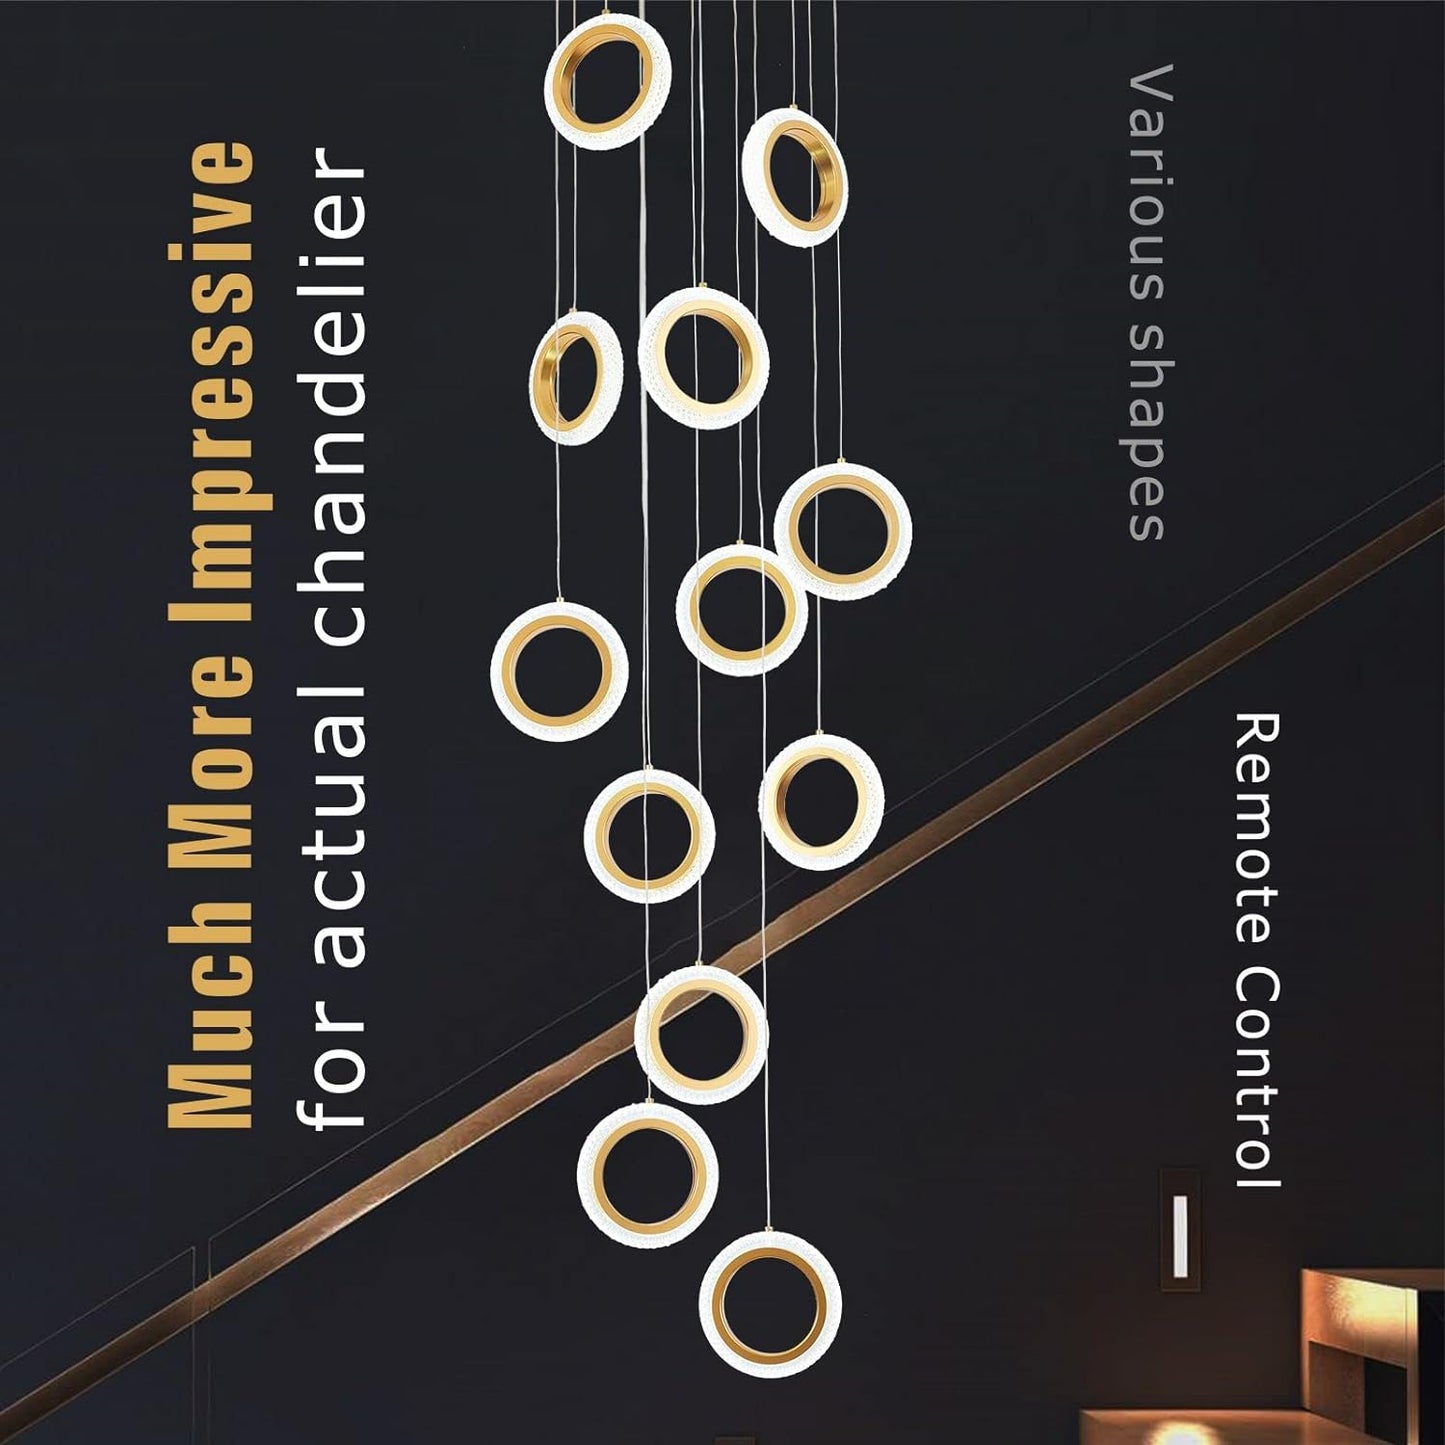 12 Rings Staircase Chandelier,Gold Modern Crystal Led Chandelier,Dimmable High Ceiling Chandelier with Remote ,Modern Led Pendant Light Led Chandelier Light ,Large High Ceilings Hanging Light Fixt